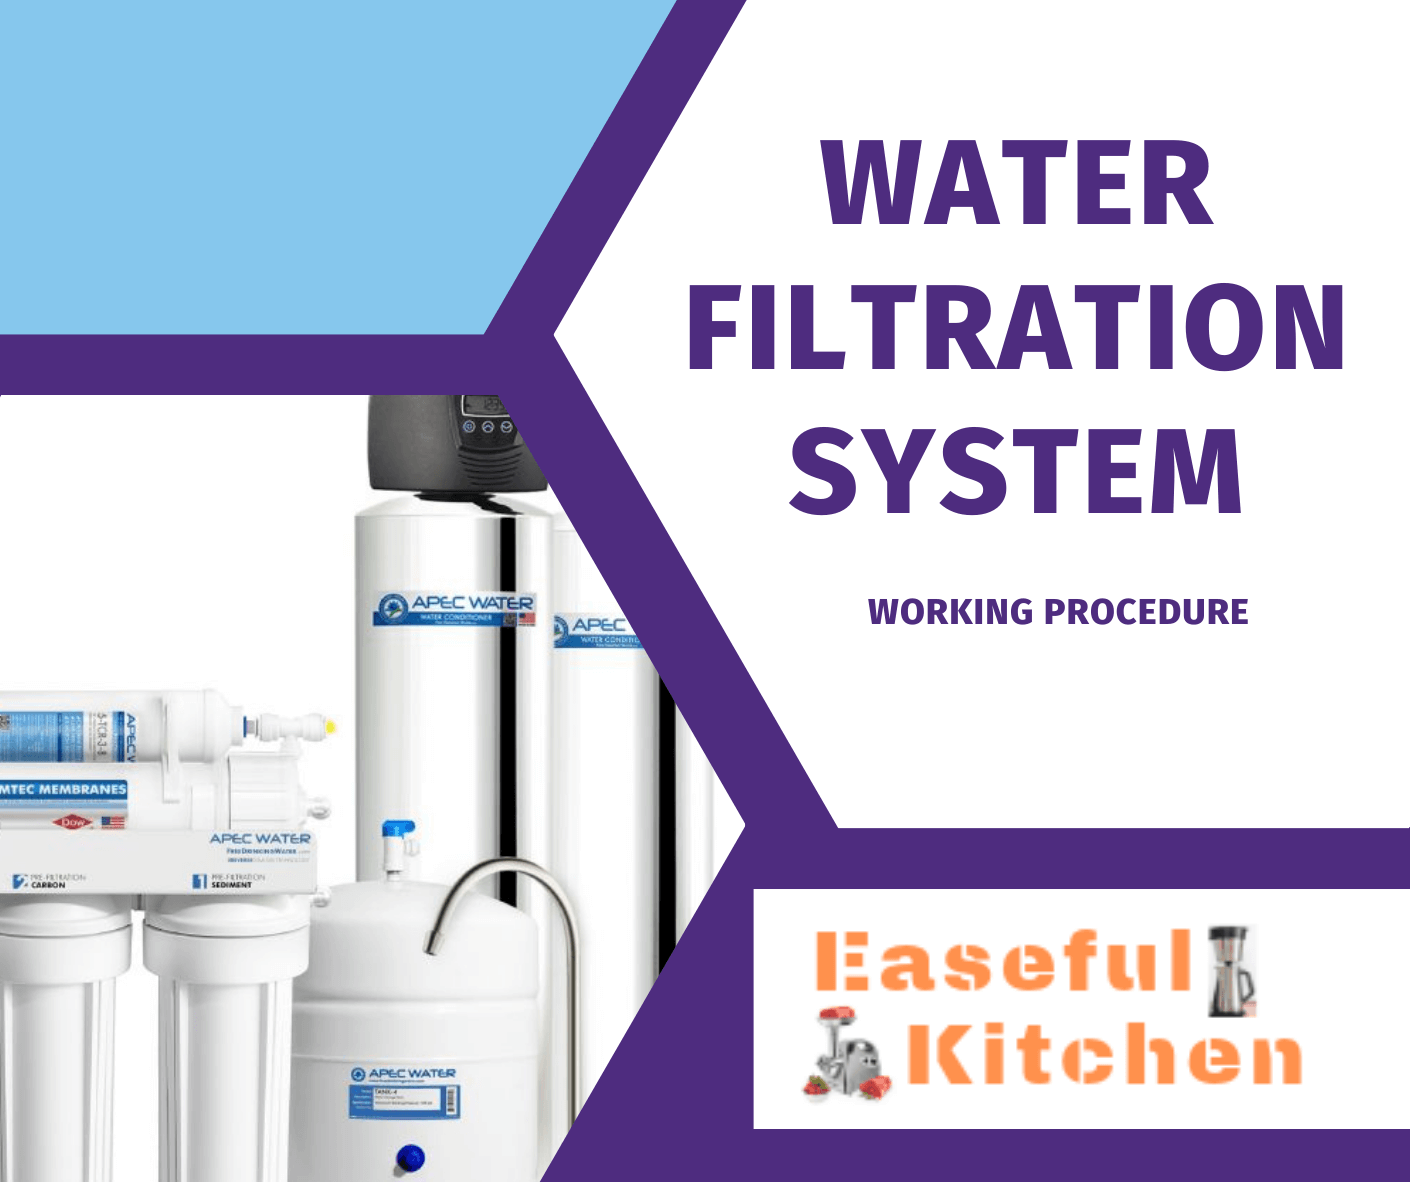 How Does a Water Filtration System Work